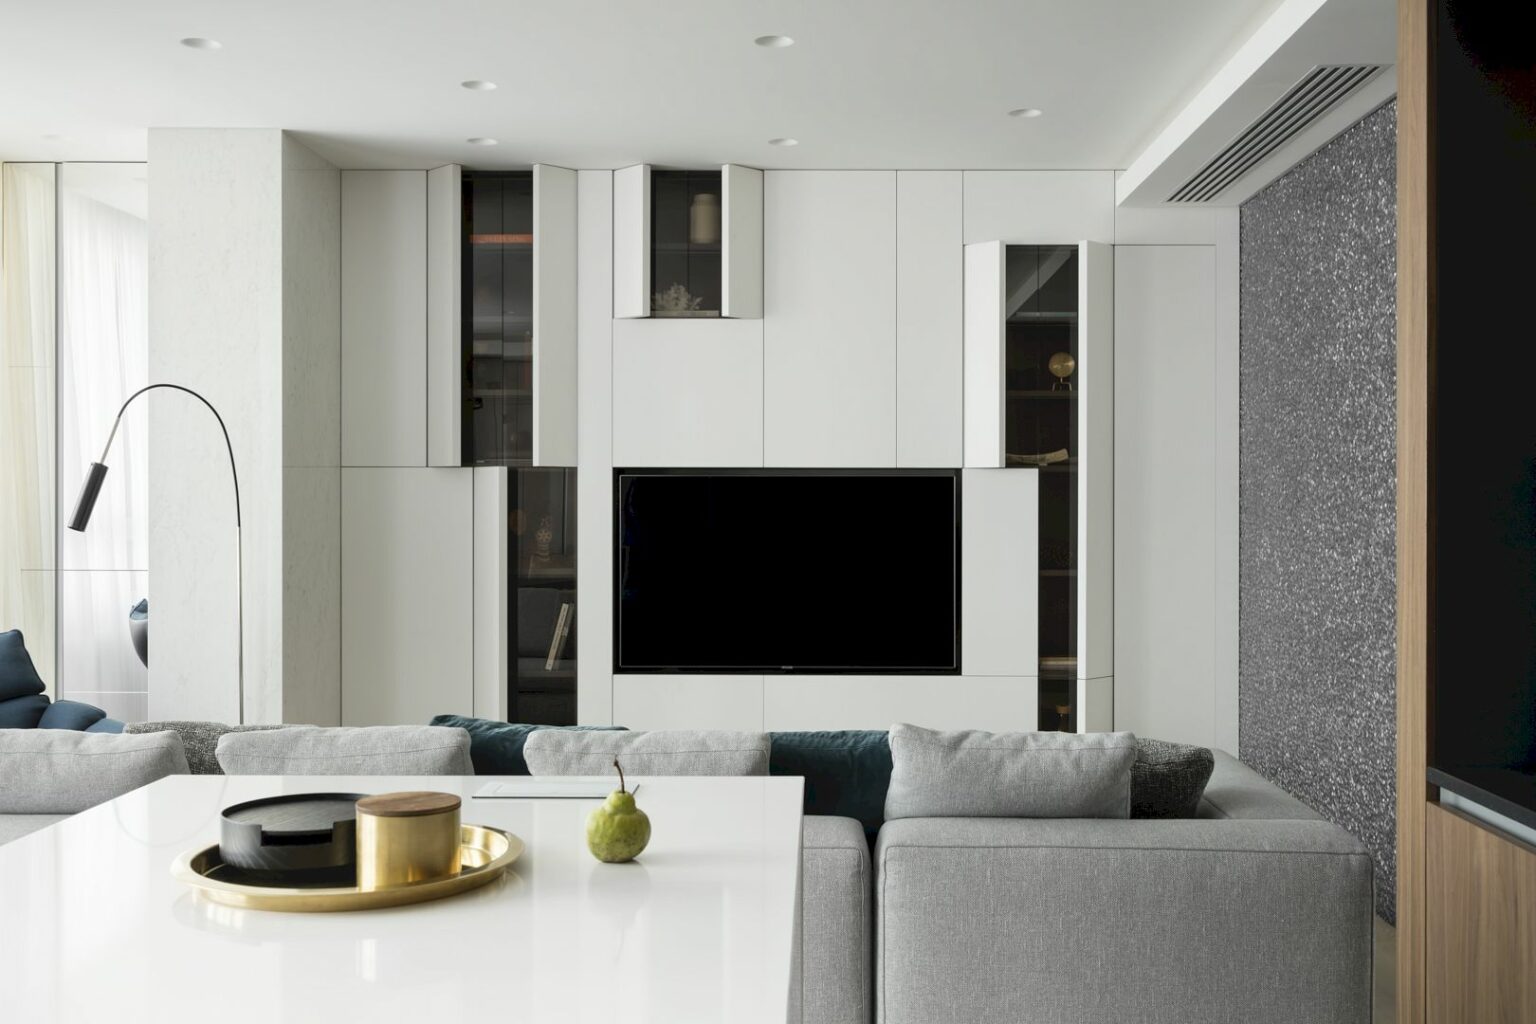 10 Stylish Living Room Designs with Wall Units To Display And Store ...